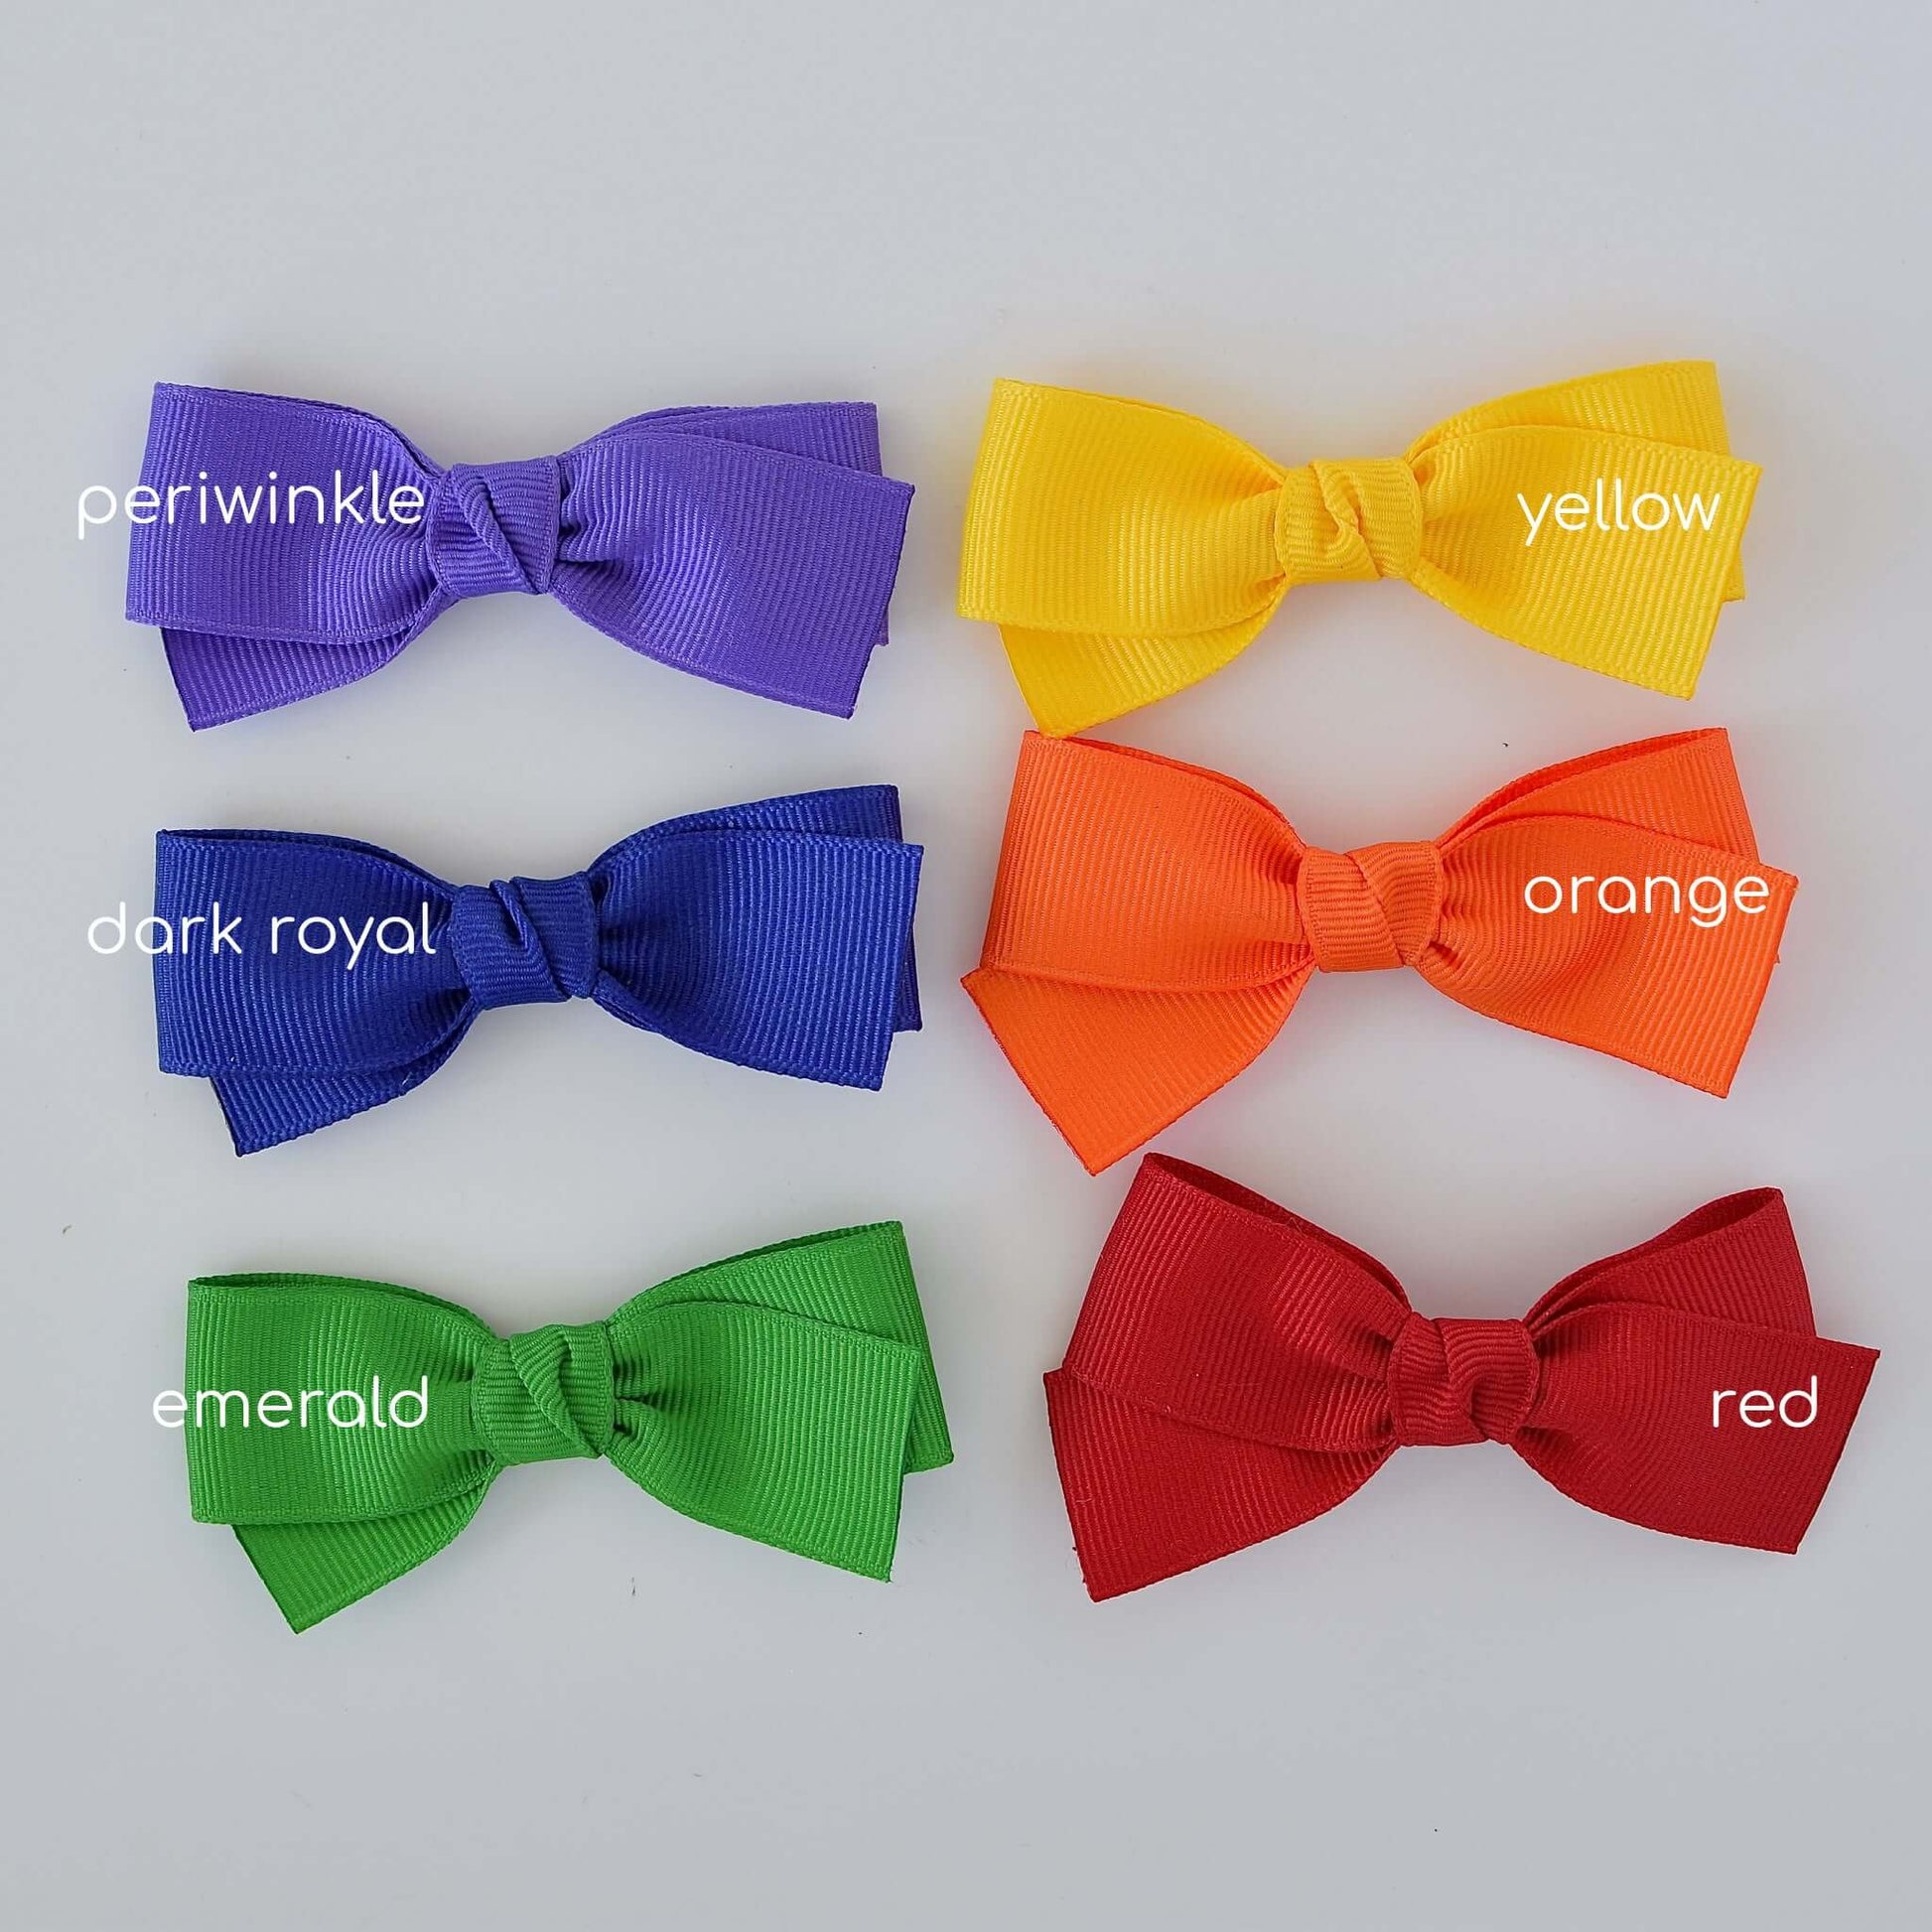 3 inch grosgrain baby Kayla bow clips in periwinkle, yellow, dark royal, orange, emerald, and red colors.